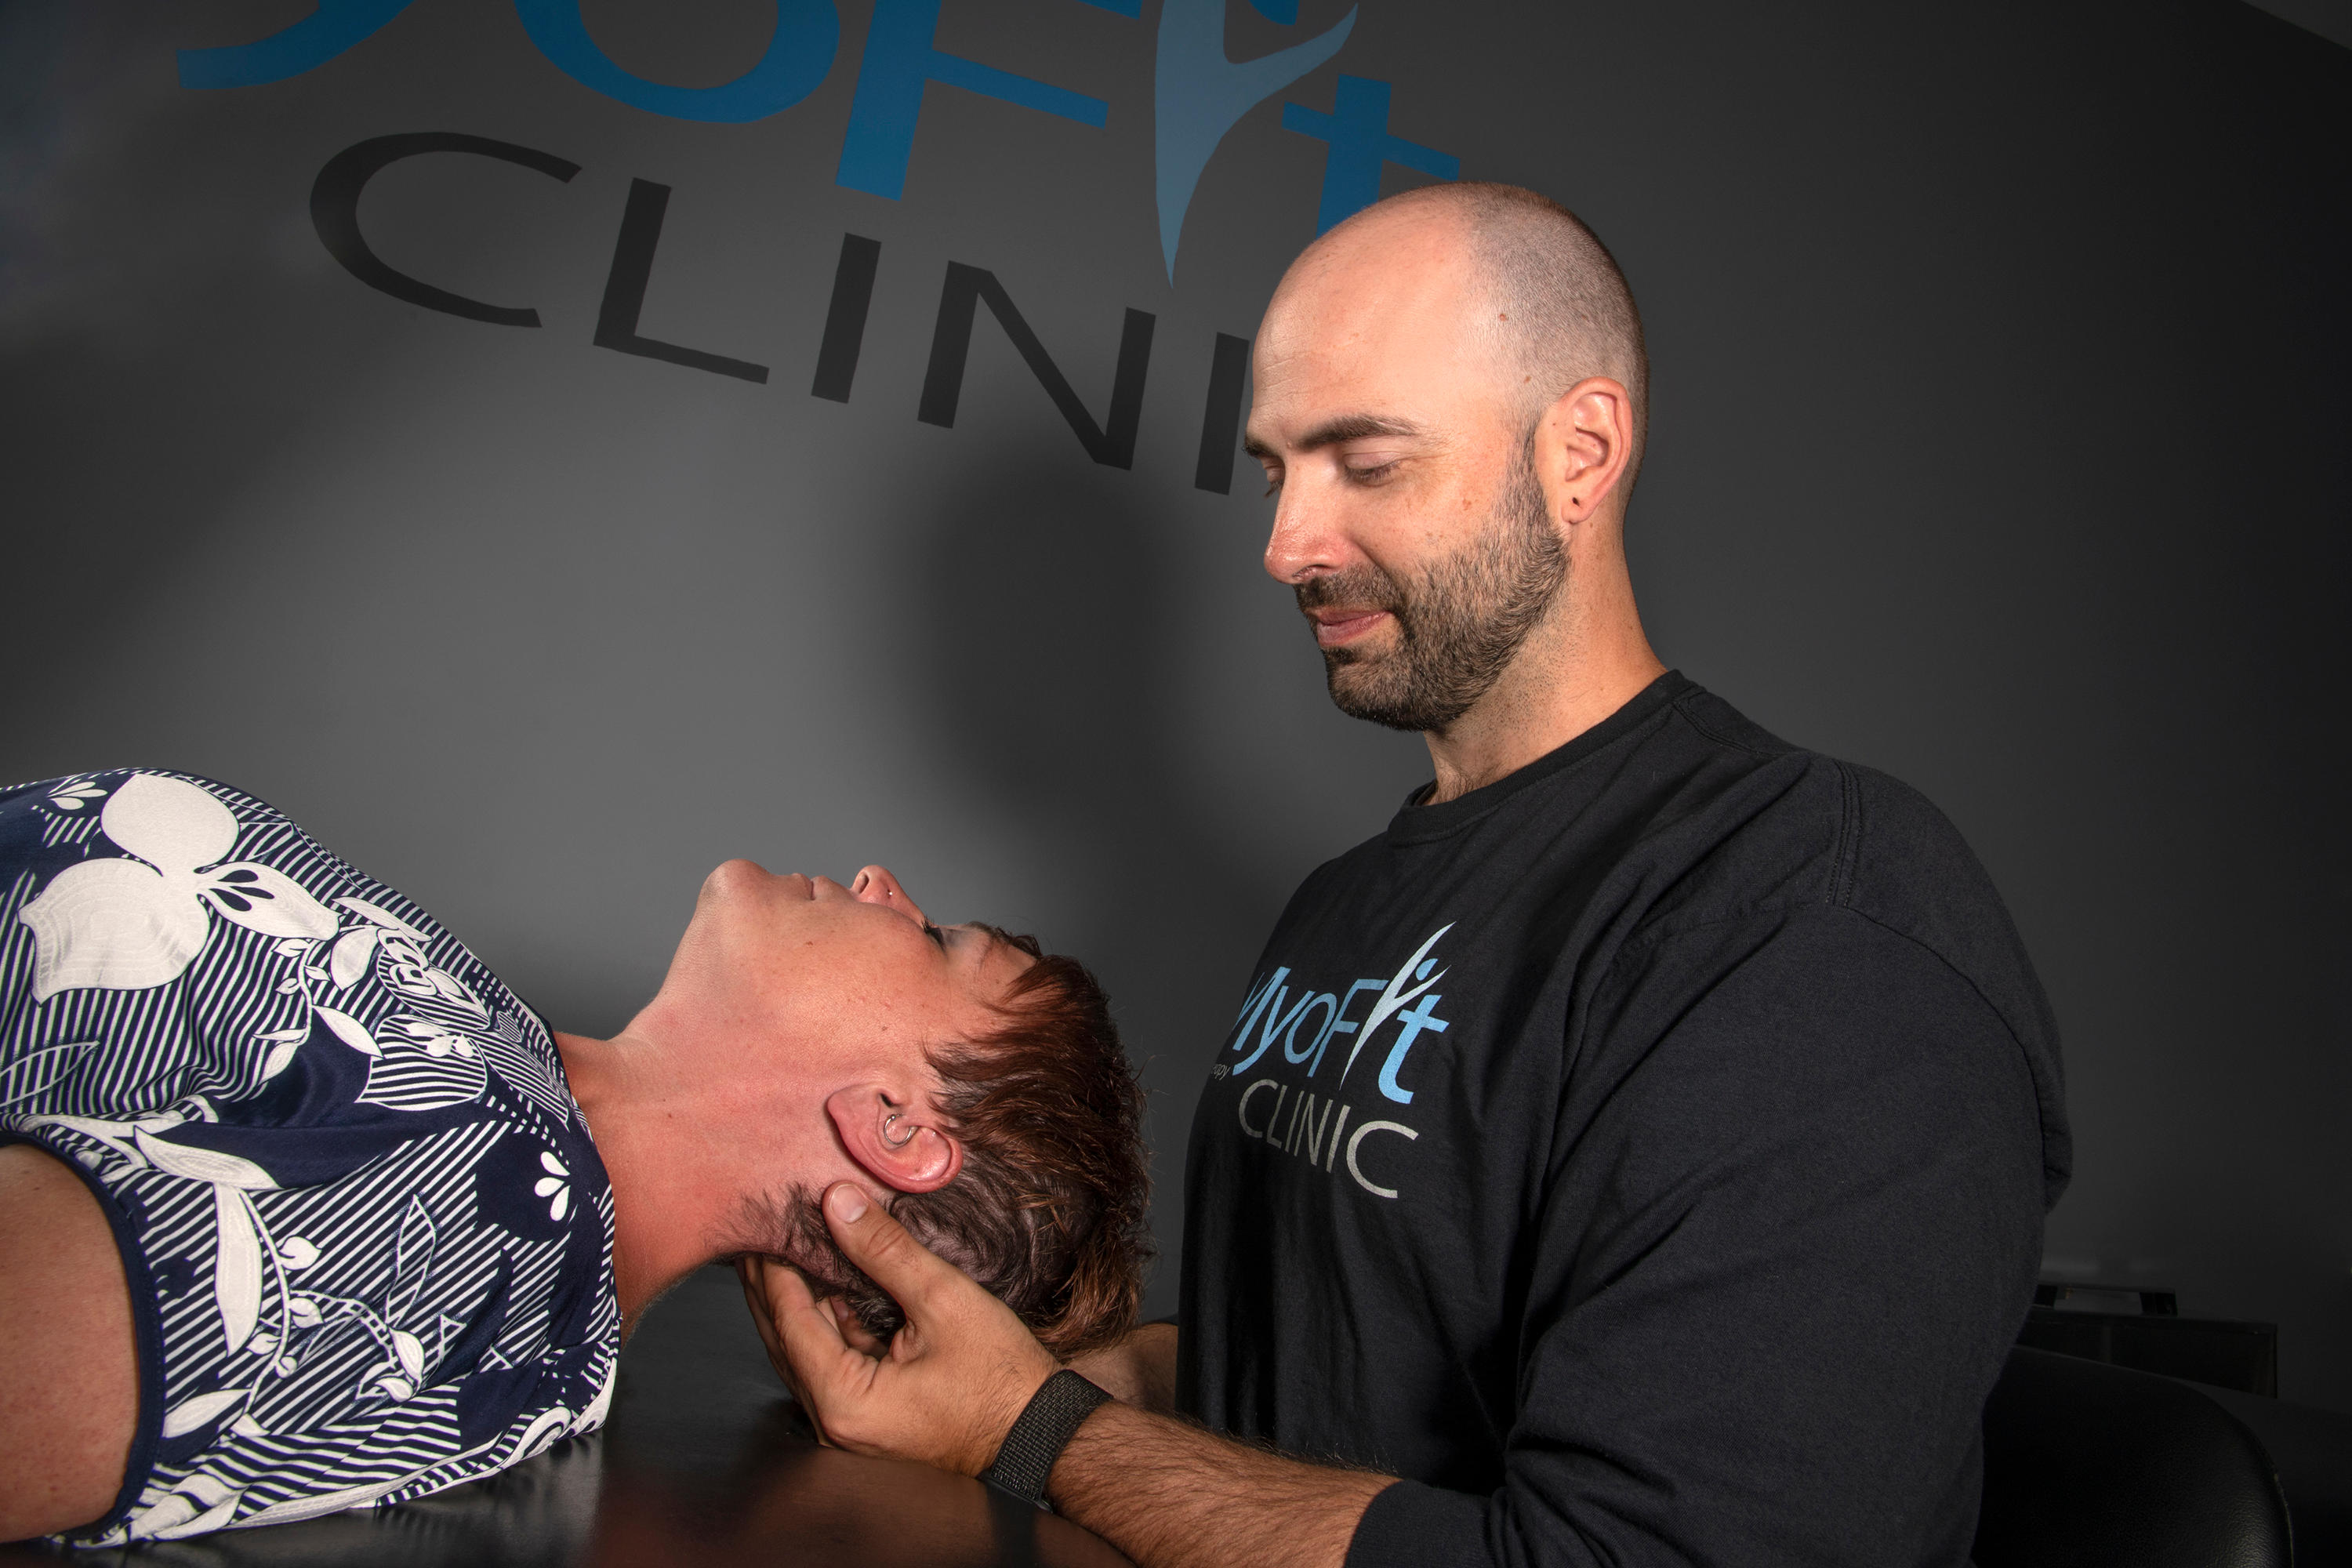 Find lasting relief from pain or injury at MyoFit Physical Therapy Clinic. Our outpatient physical therapy practice includes orthopedic physical therapy along with wellness services, such as dry needling, cold laser therapy, therapeutic massage and weight loss services. In addition to pain management, we also help our patients stay healthy and active by addressing issues like imbalance and weakness (improving your balance and strength.)

CEO Dr. Adam Cramer, PT, DPT, knew he wanted to be a physical therapist—aiding with pain management and sports enhancement training—since playing sports in high school. His myriad of physical services includes instrument-assisted soft tissue mobilization and myofascial release.